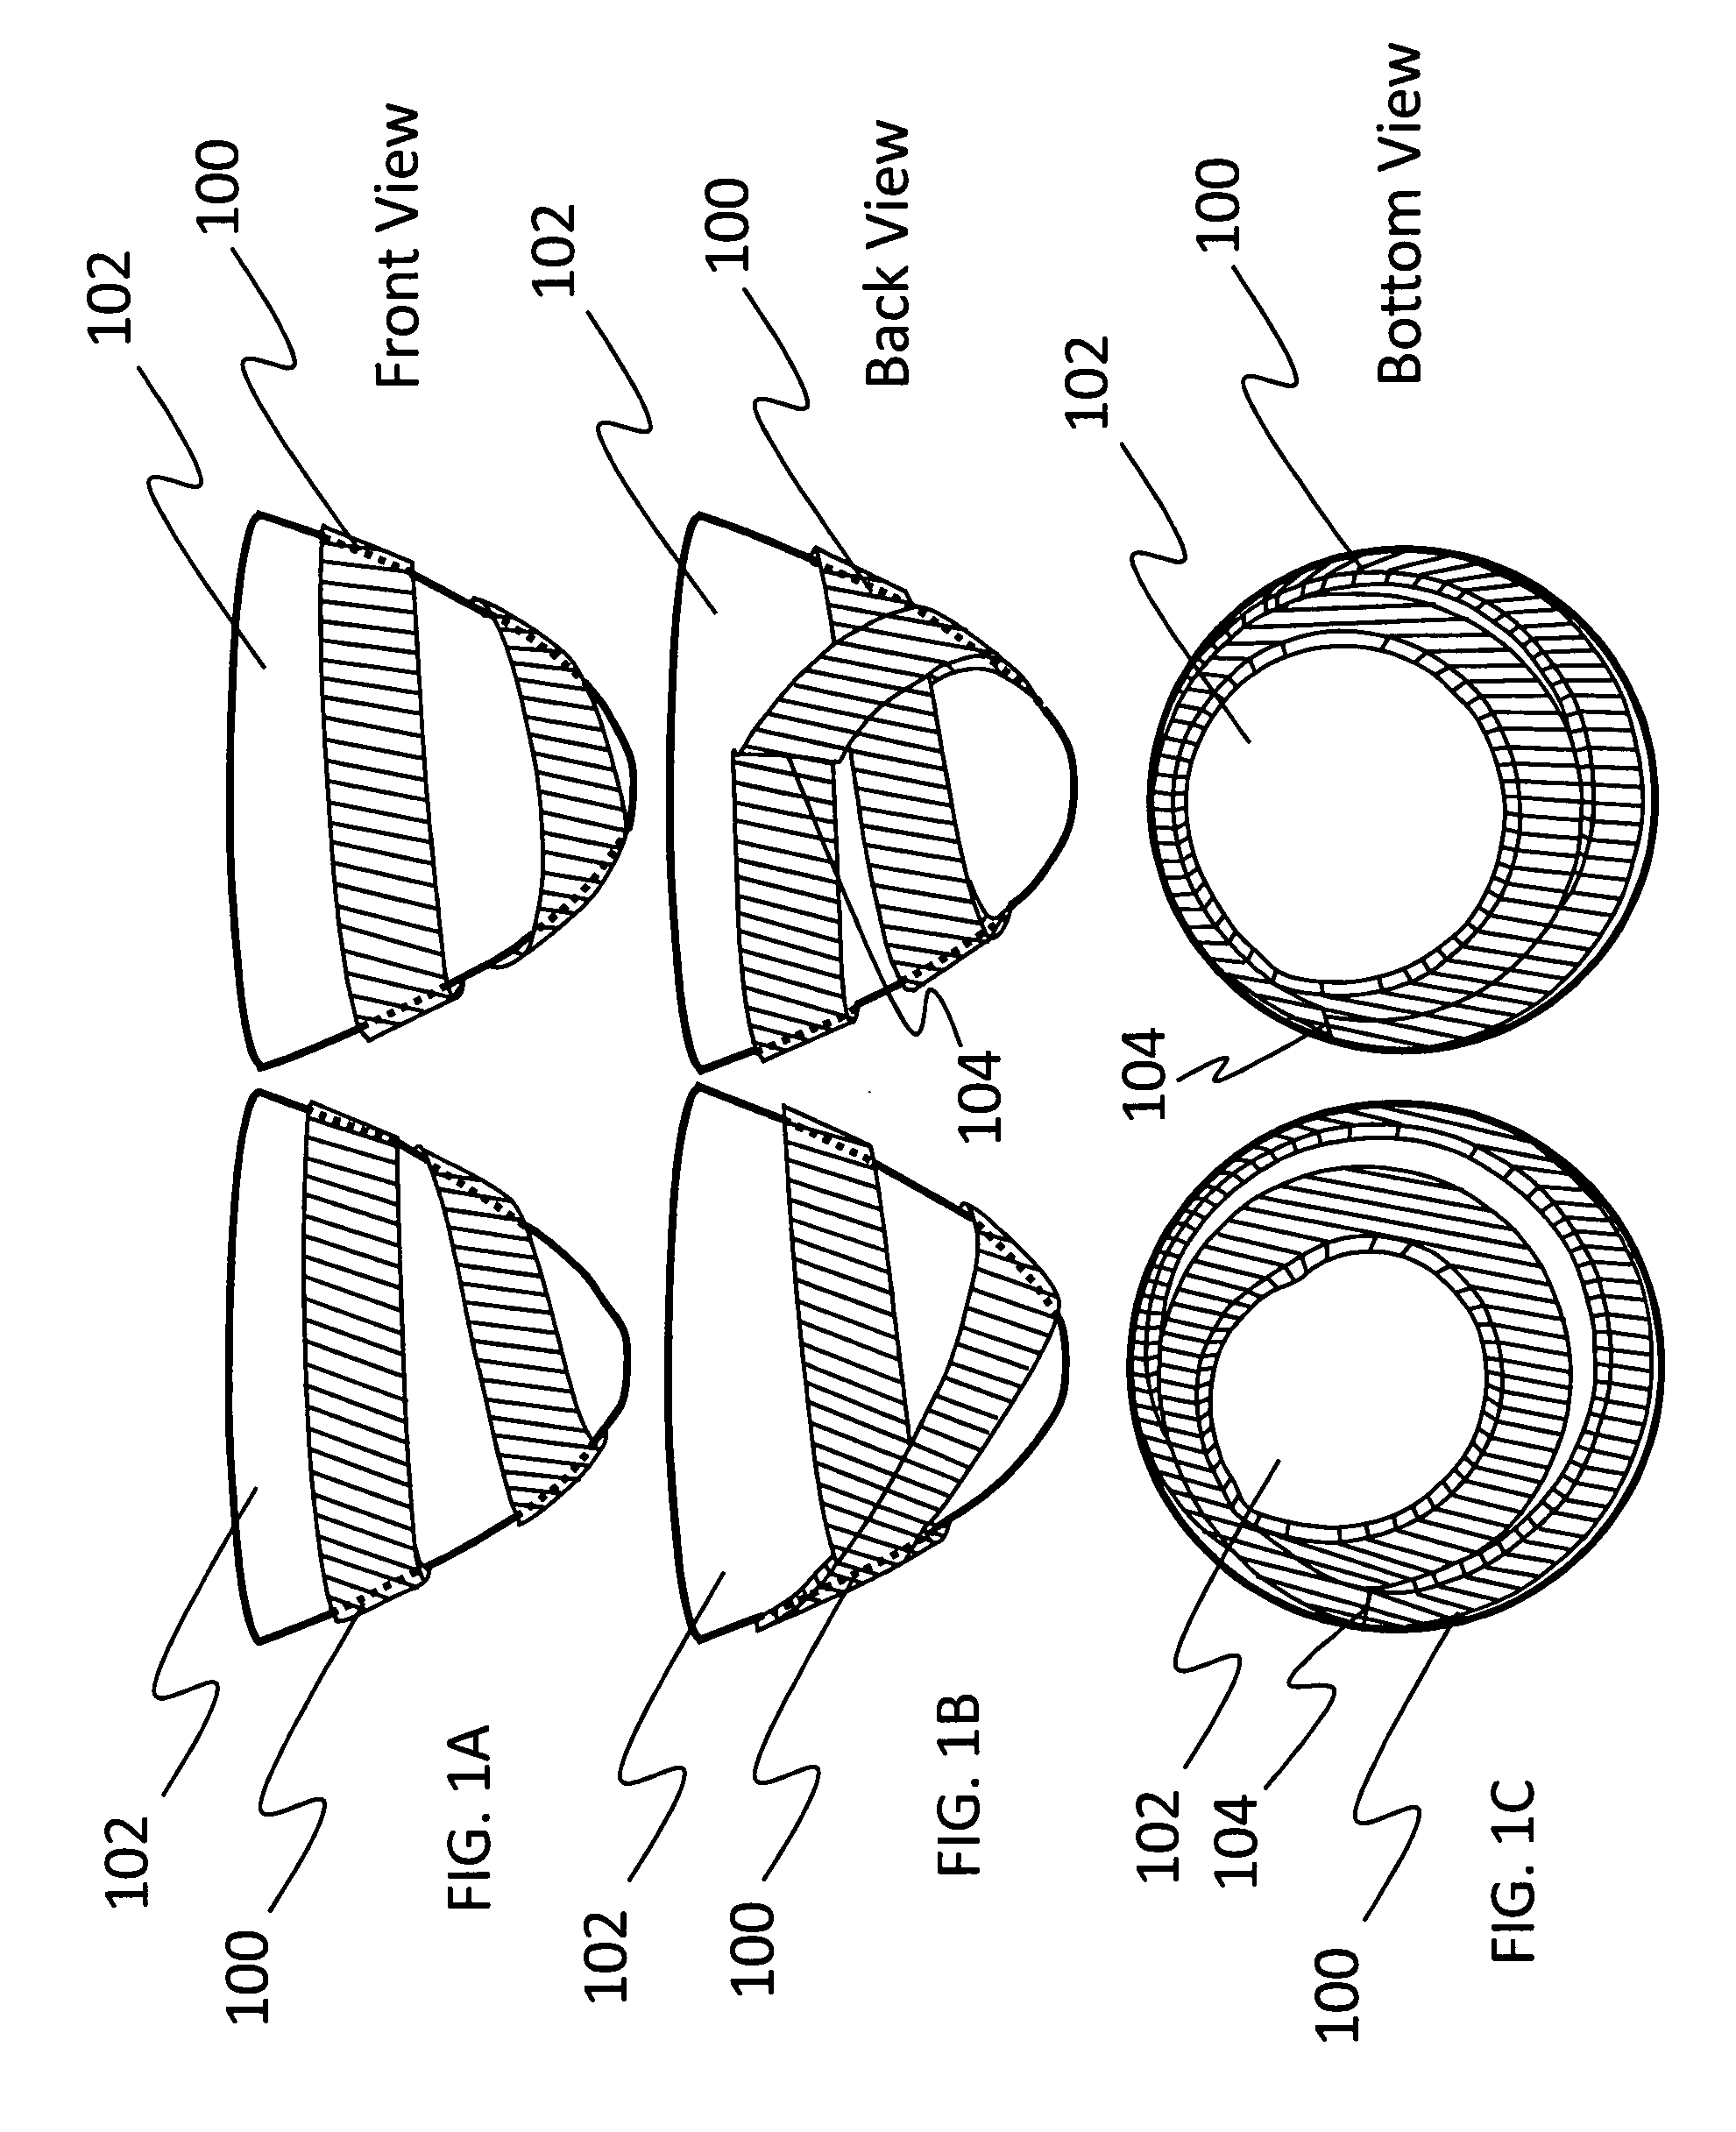 Cardiac assist system using helical arrangement of contractile bands and helically-twisting cardiac assist device